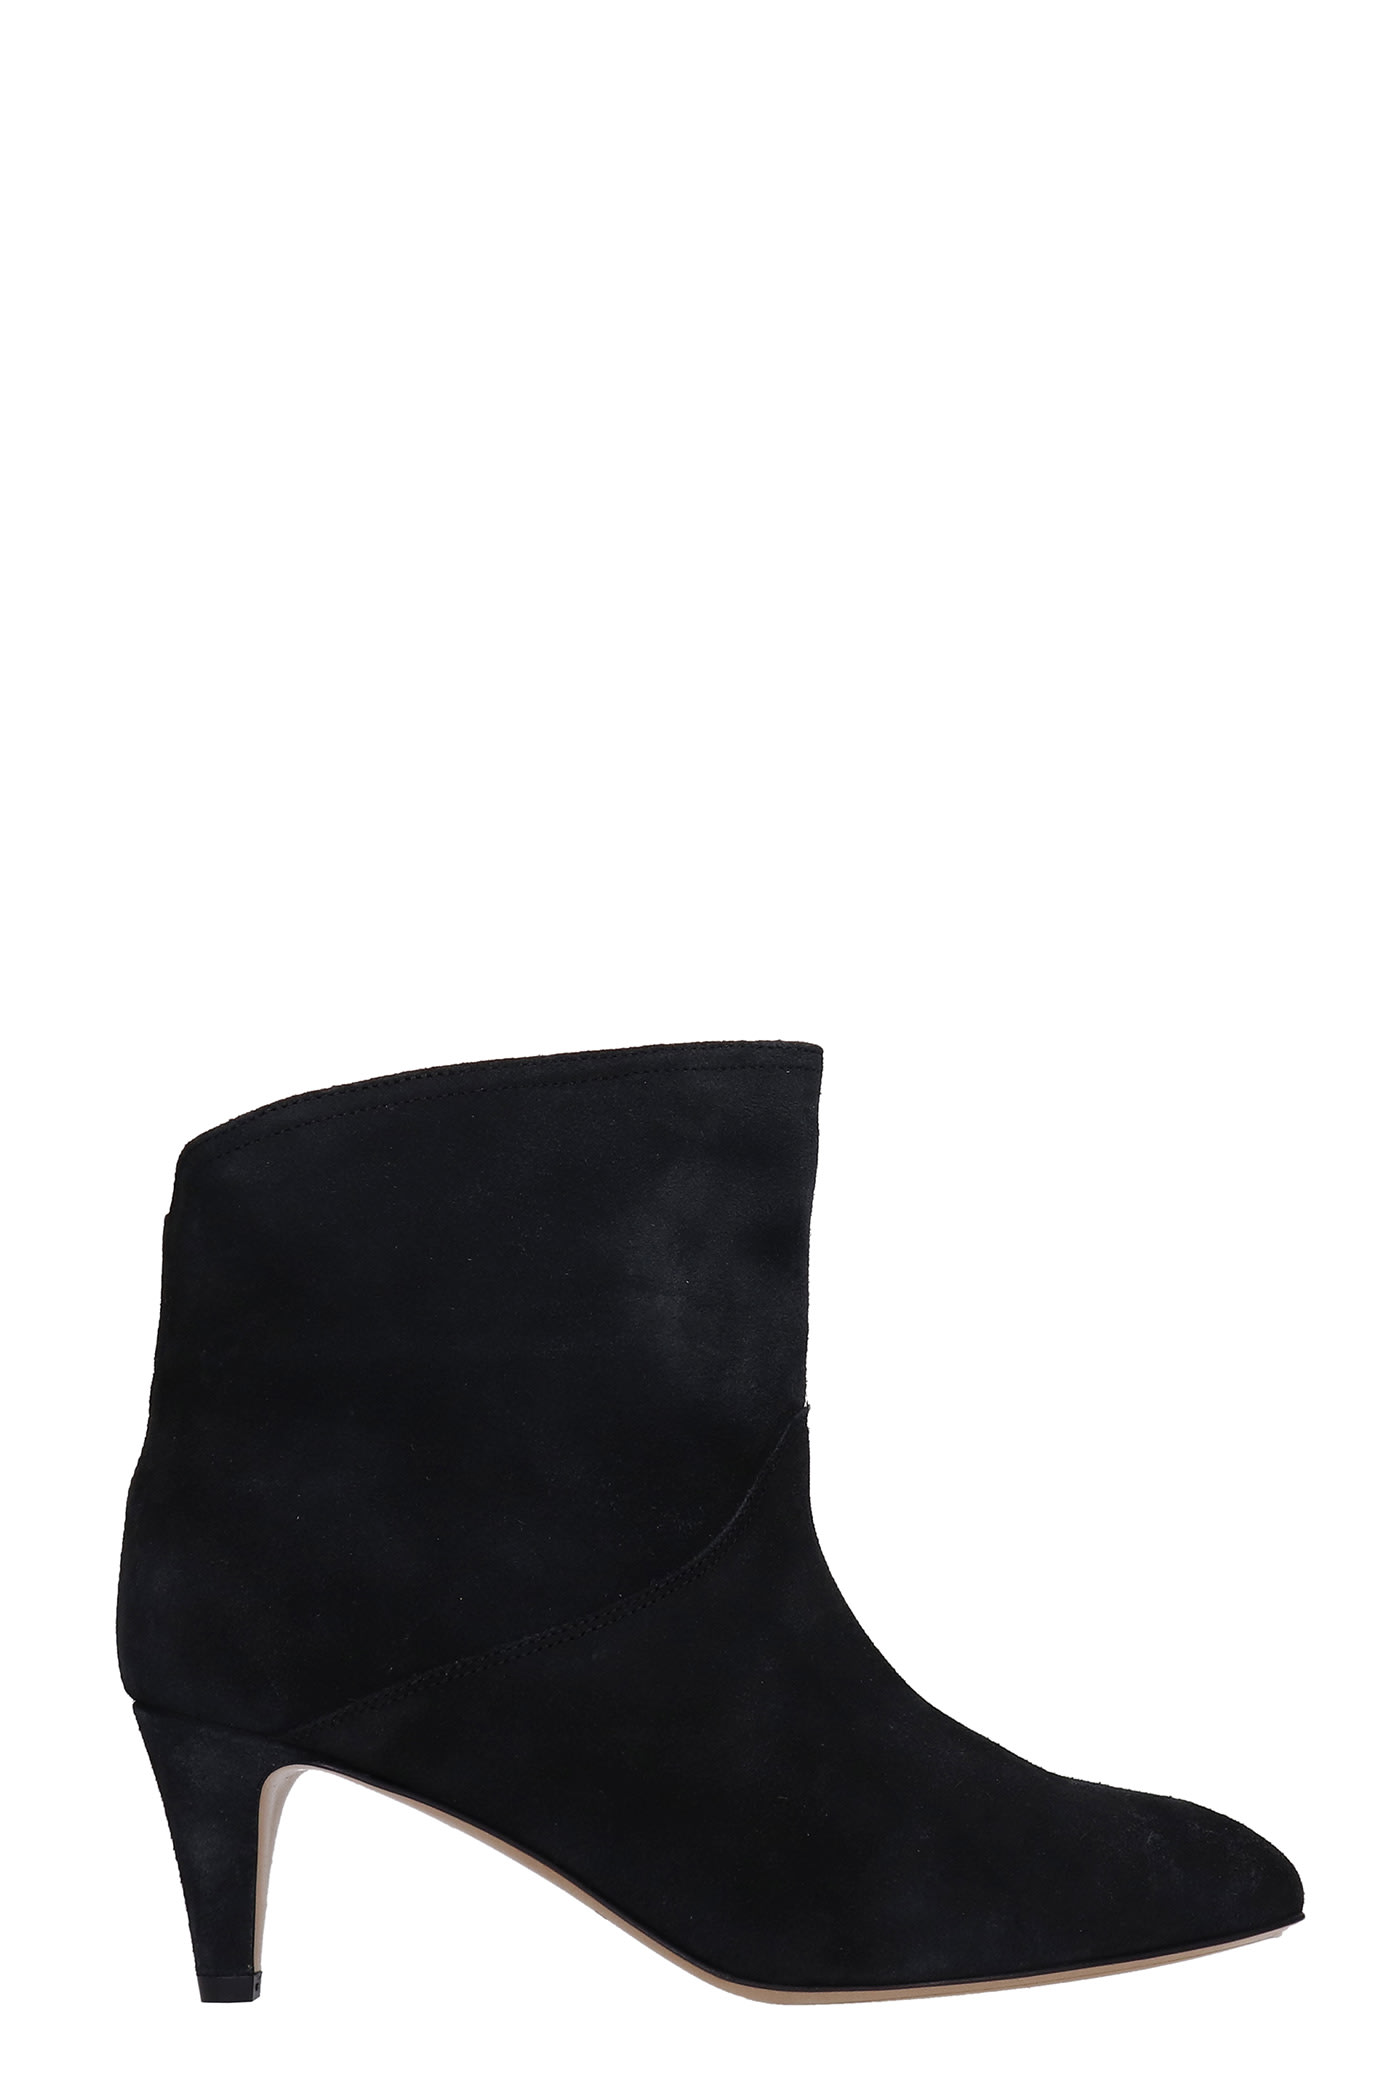 Isabel Marant Defya High Heels Ankle Boots In Black Suede